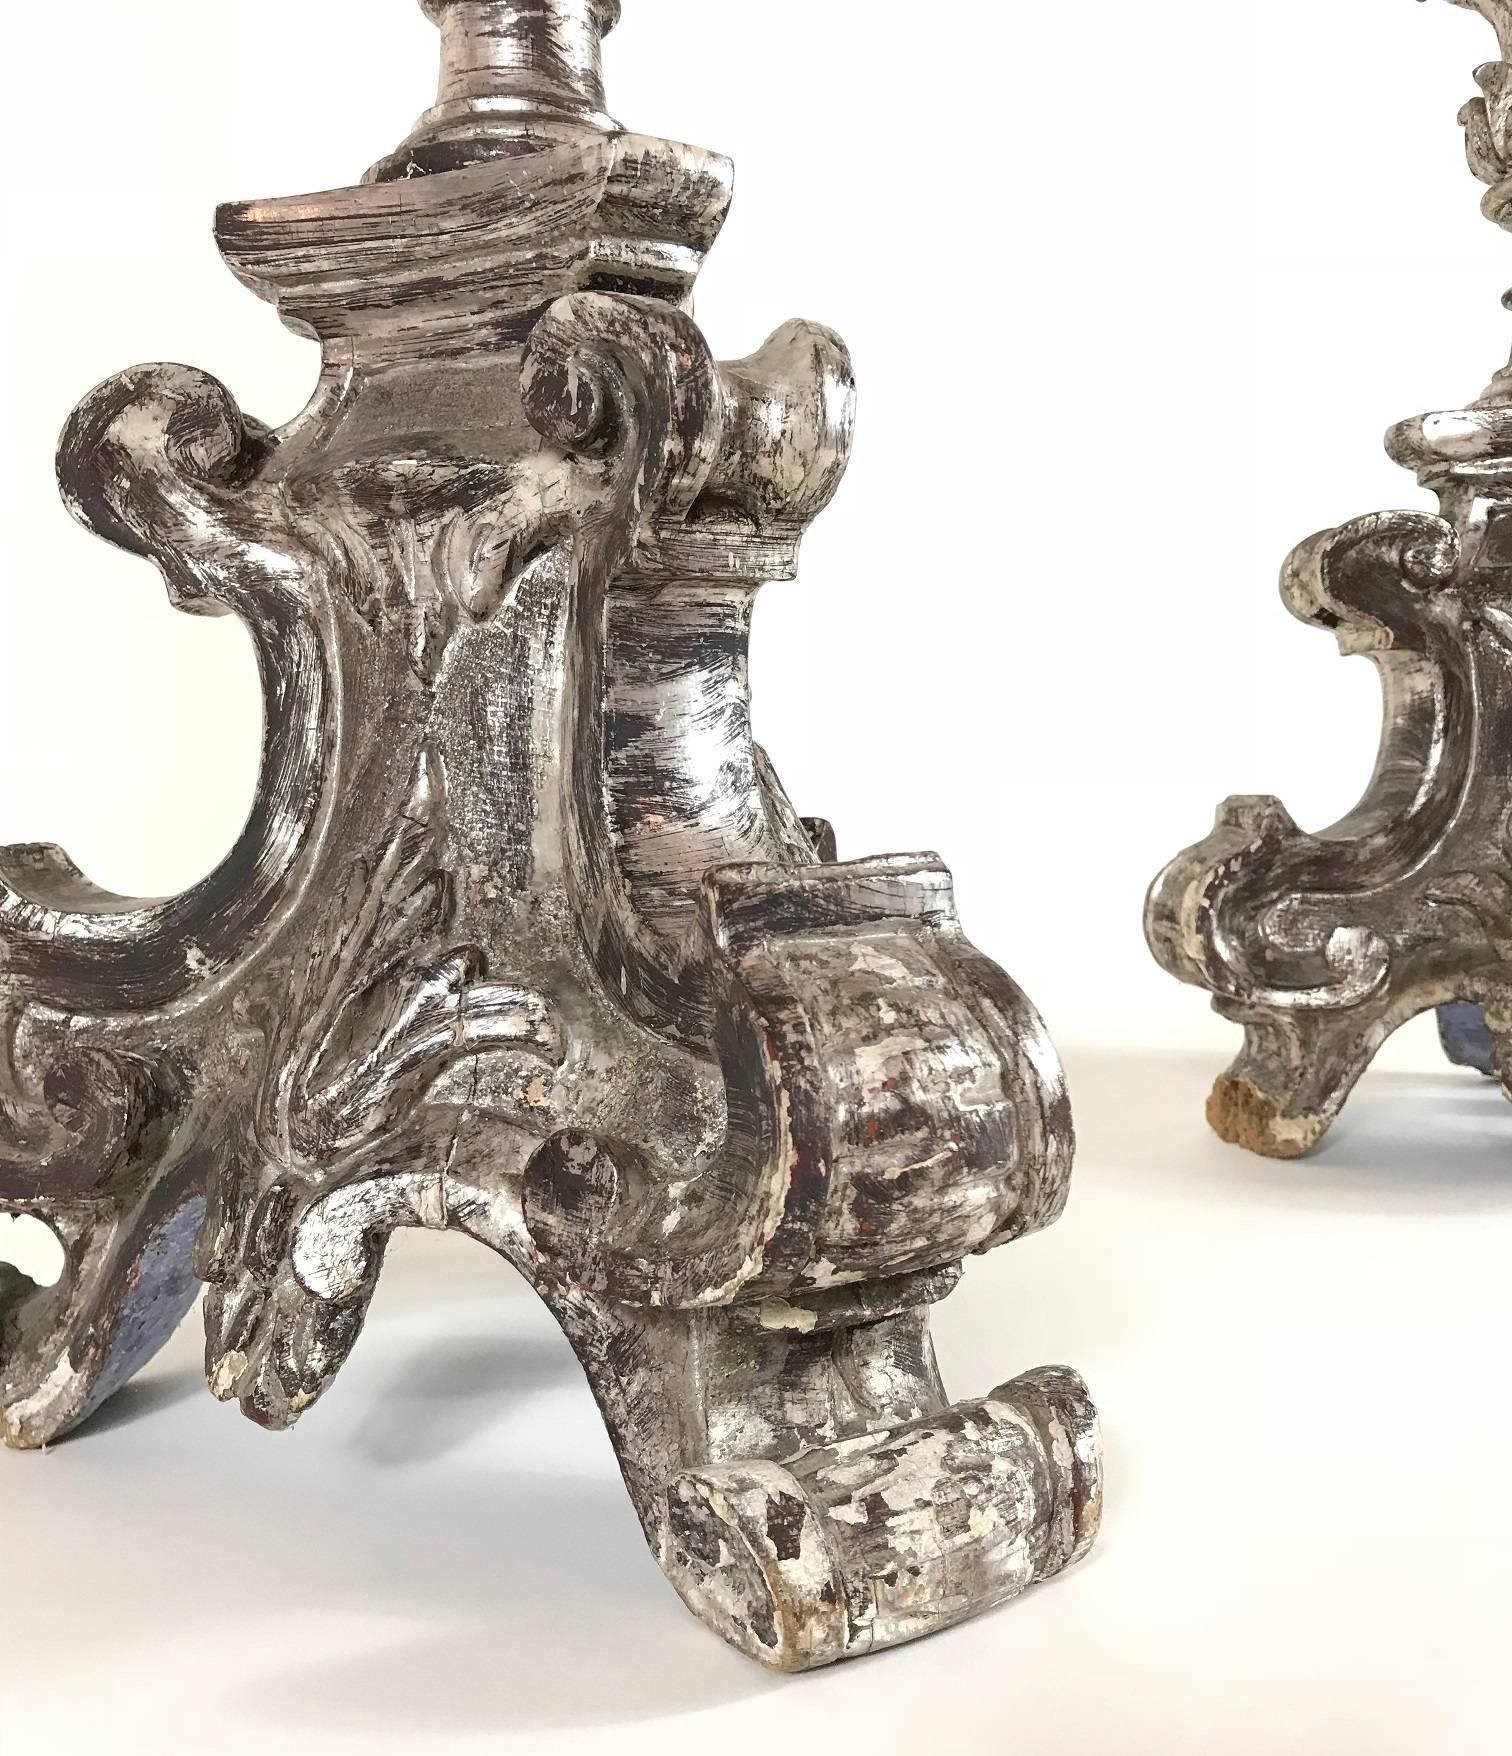 Italian Hand-Carved Baroque Silver Giltwood Candlesticks, 17th Century Italy